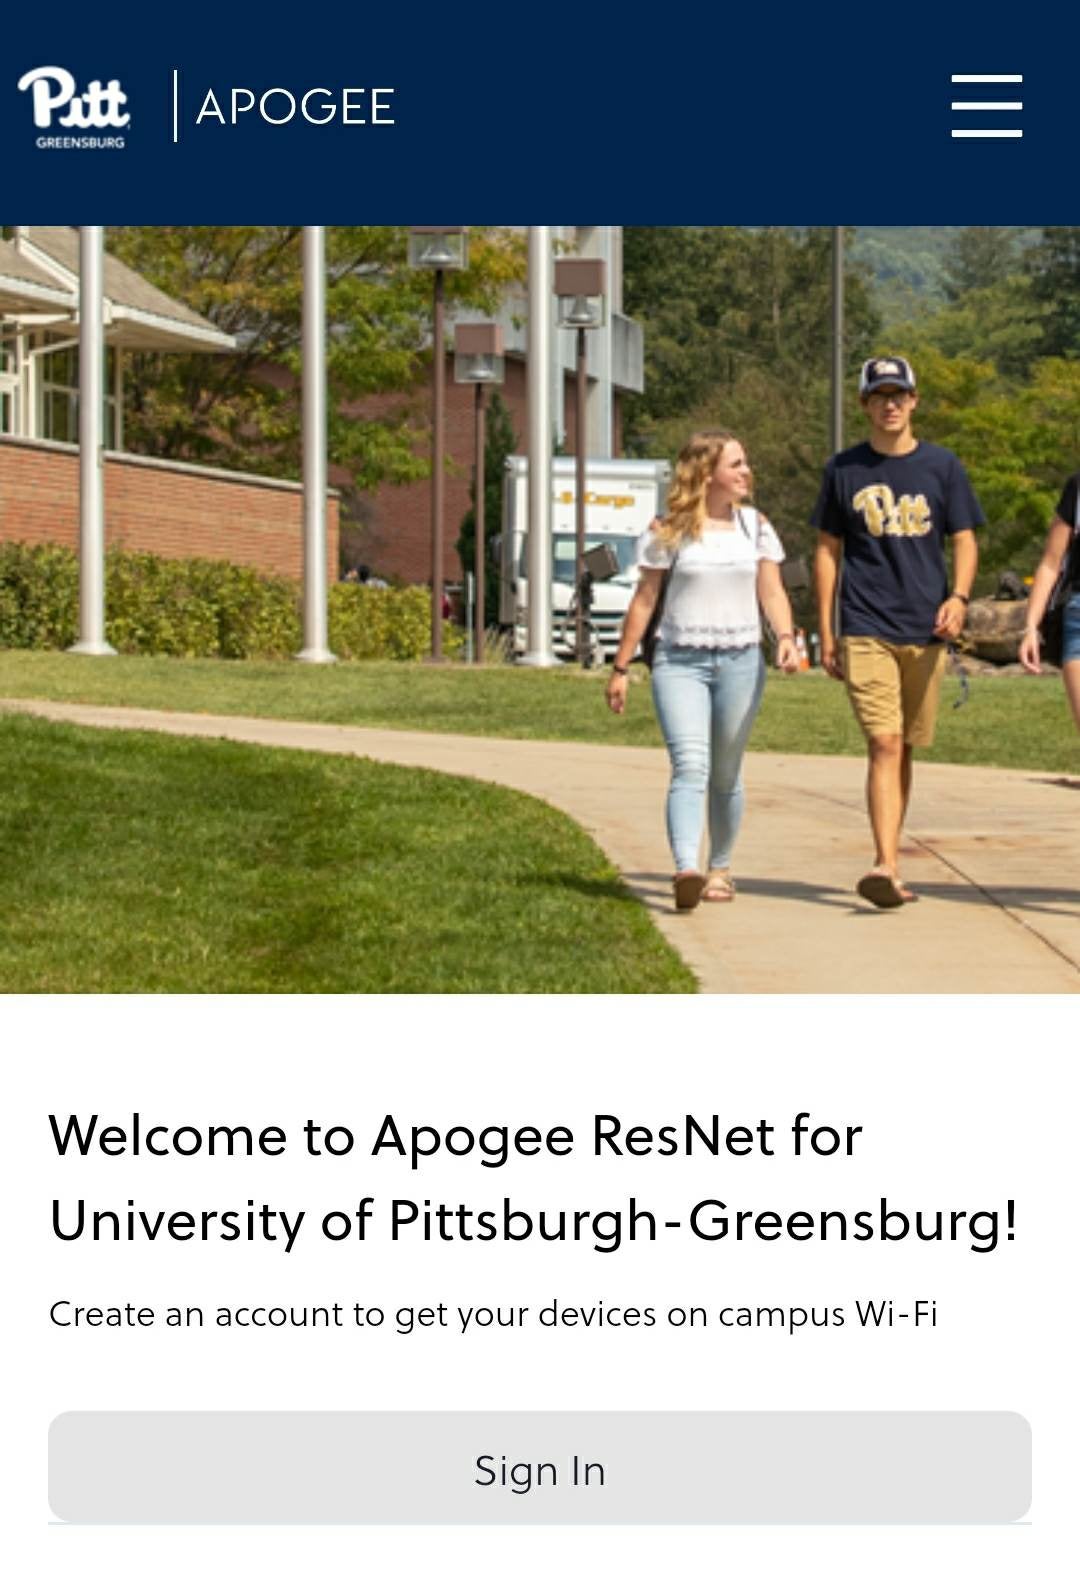 Screenshot of Apogee app reading "Welcome to Apogee ResNet for University of Pittsburgh-Greensburg! Create an account to get your devices on campus Wi-Fi. Sign In"